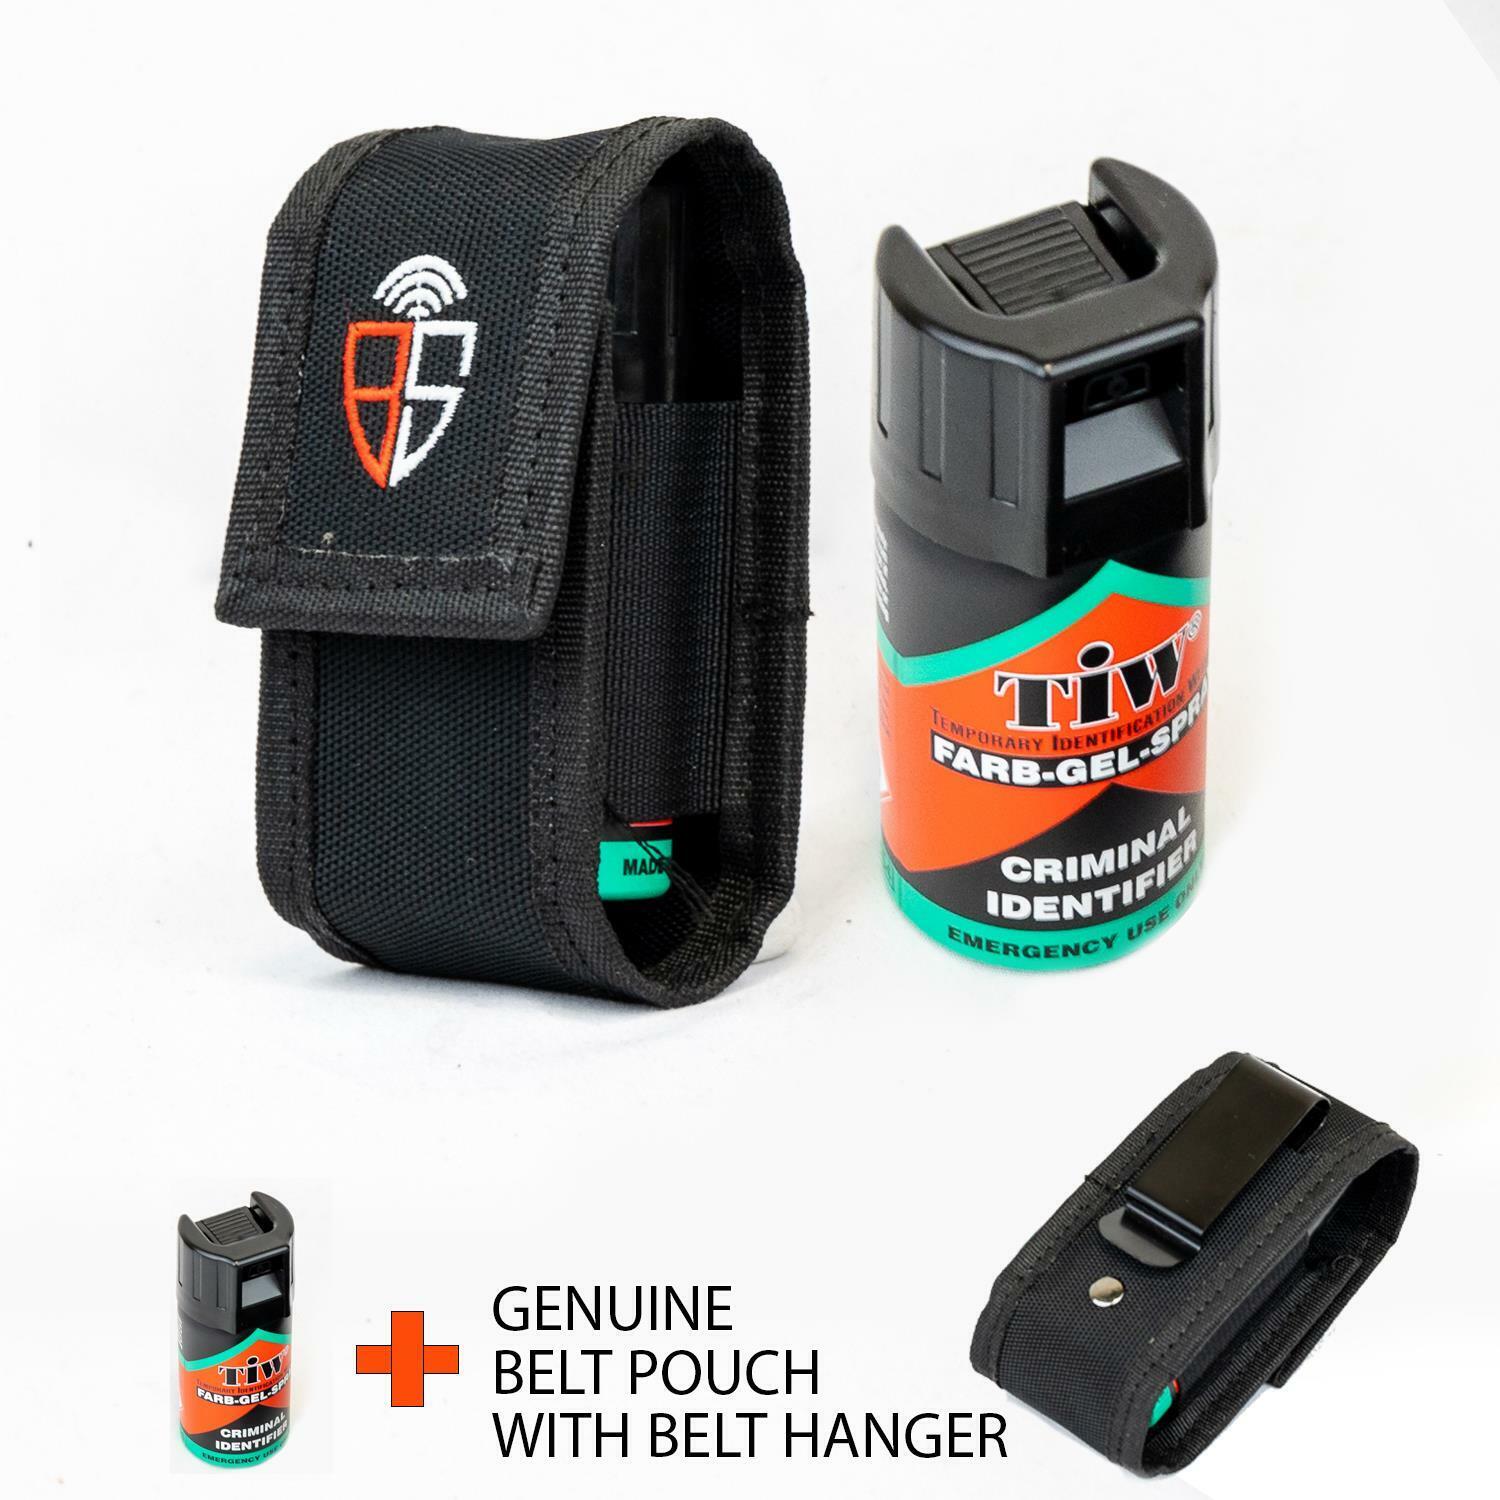 Self Defence TIW FARB gel emergency spray belt We OFFer at cheap prices with genuine pouc Tucson Mall